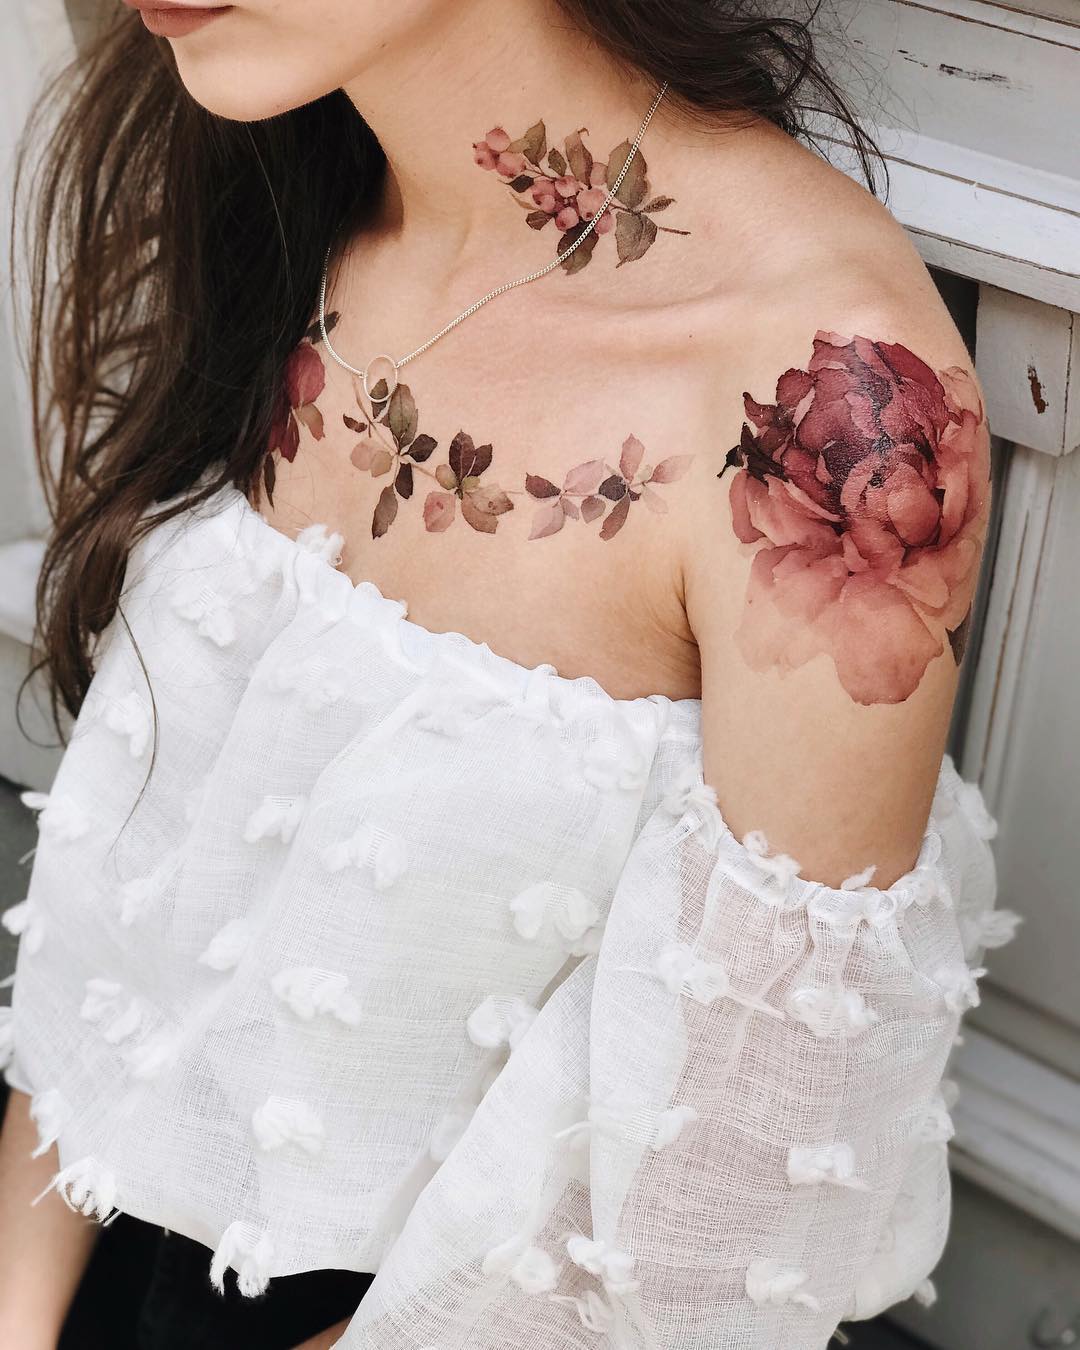 Buy Colored Temporary Tattoo Violet mood: a luxurious peony